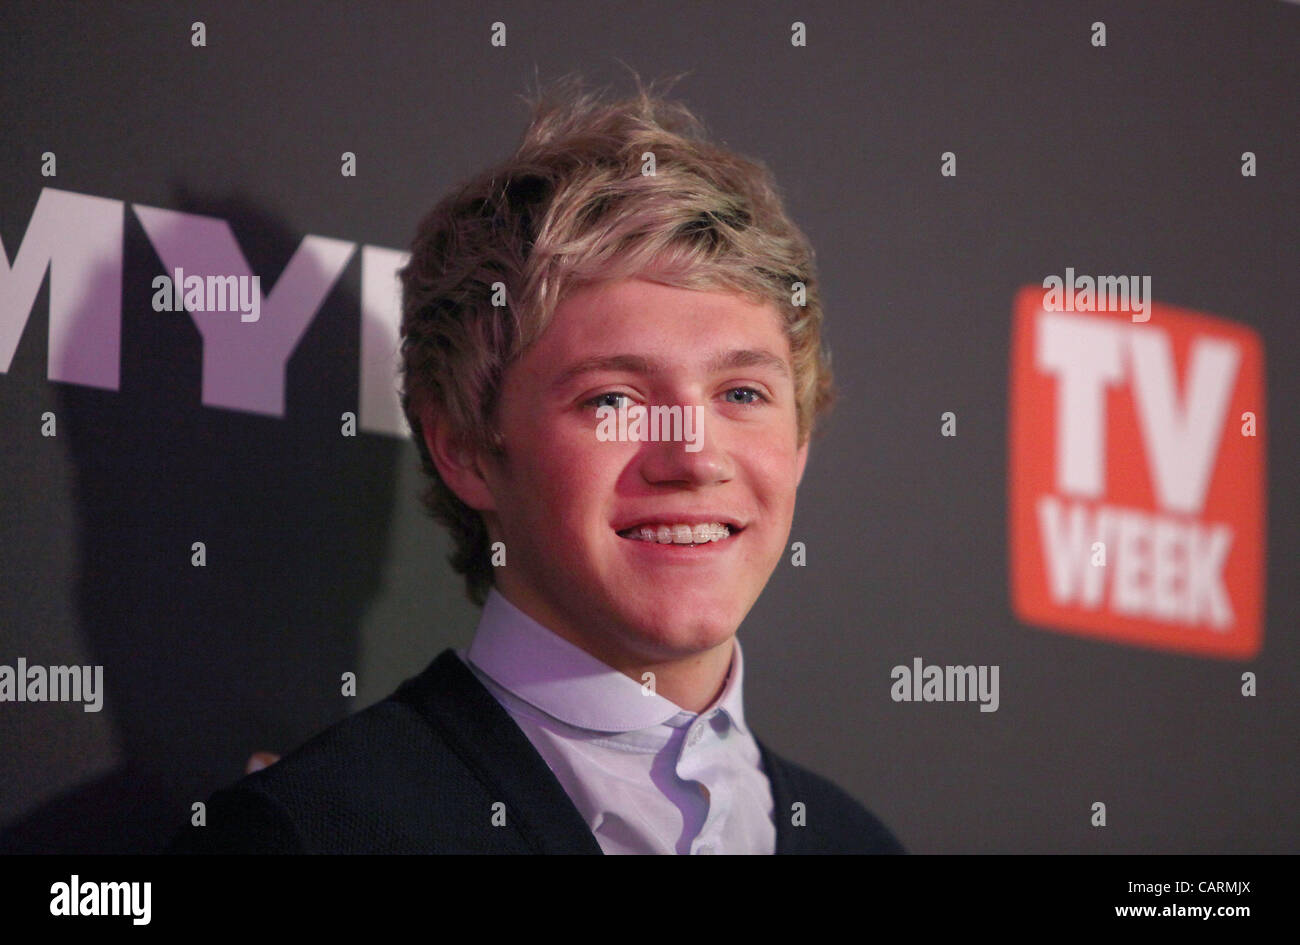 April 15, 2012 - Melbourne, NSW, Australia - NIALL HORAN of the band One Direction arrives at the 2012 TV Week Logie Awards in Melbourne at the Crown Casino (Credit Image: © Marianna Massey/ZUMAPRESS.com) Stock Photo